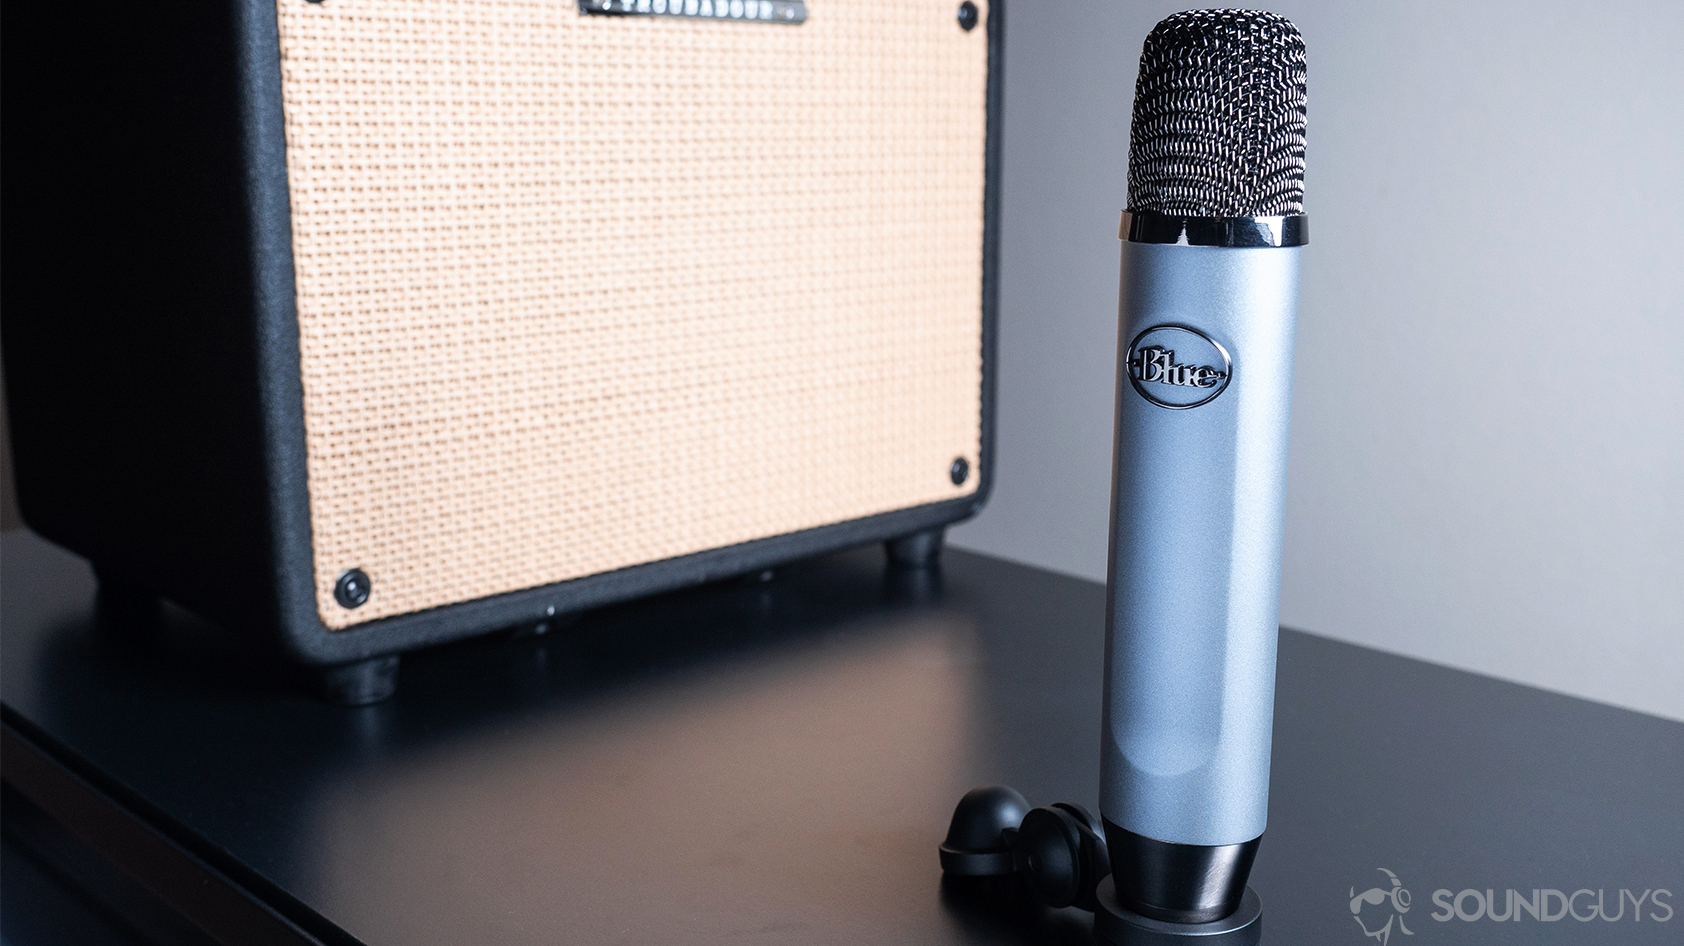 Blue Ember: The mic resting on a table in front of a guitar amp on a black surface.